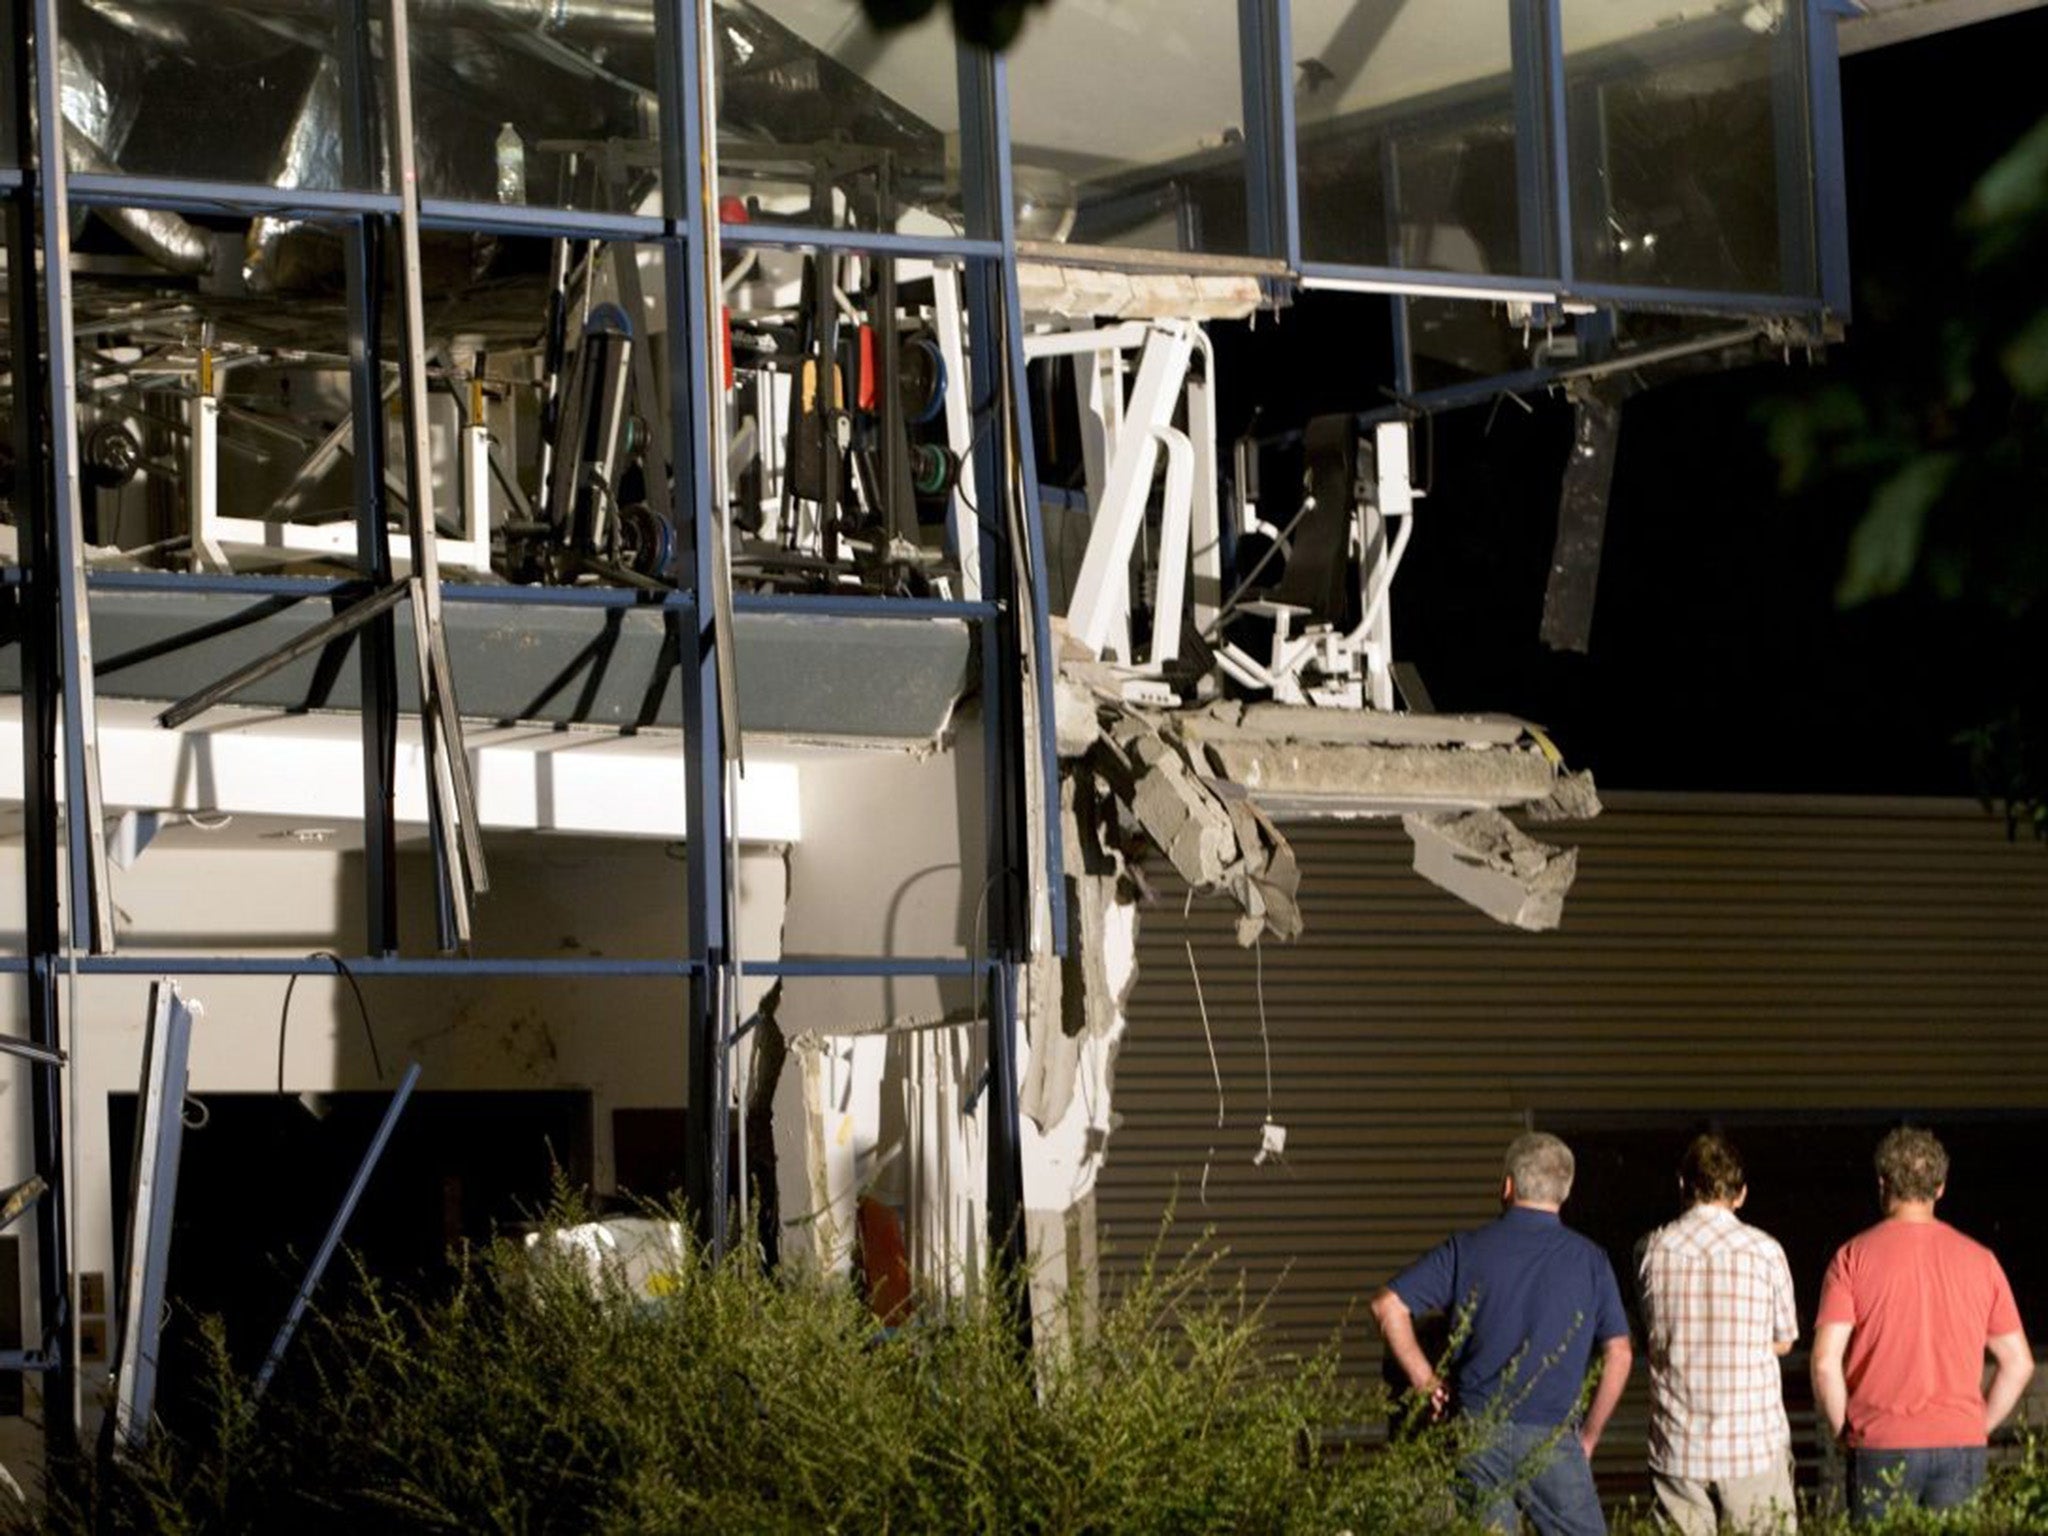 Police inspectors survey the damage to the sports complex in Chimay, Belgium after the explosion on Thursday night